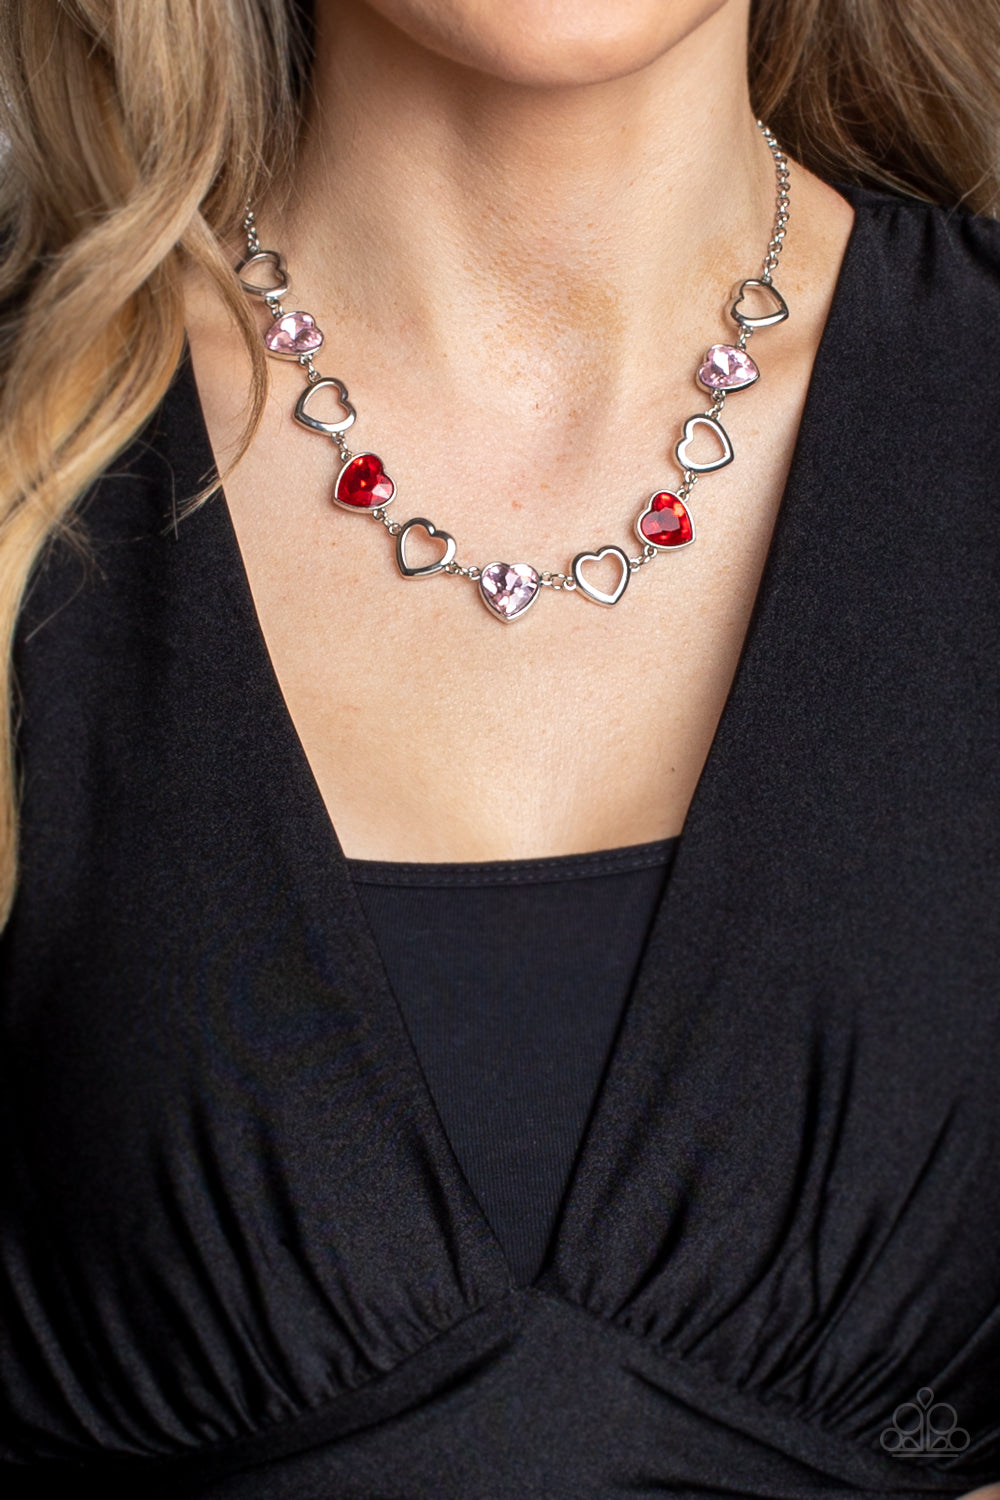 Paparazzi Accessories Contemporary Cupid - Multi Shiny, silver silhouette hearts alternate between faceted red and pink heart gems pressed into silver frames.The high-sheen and sparkly display coalesce around the collar for a cupid-like charm. Features an